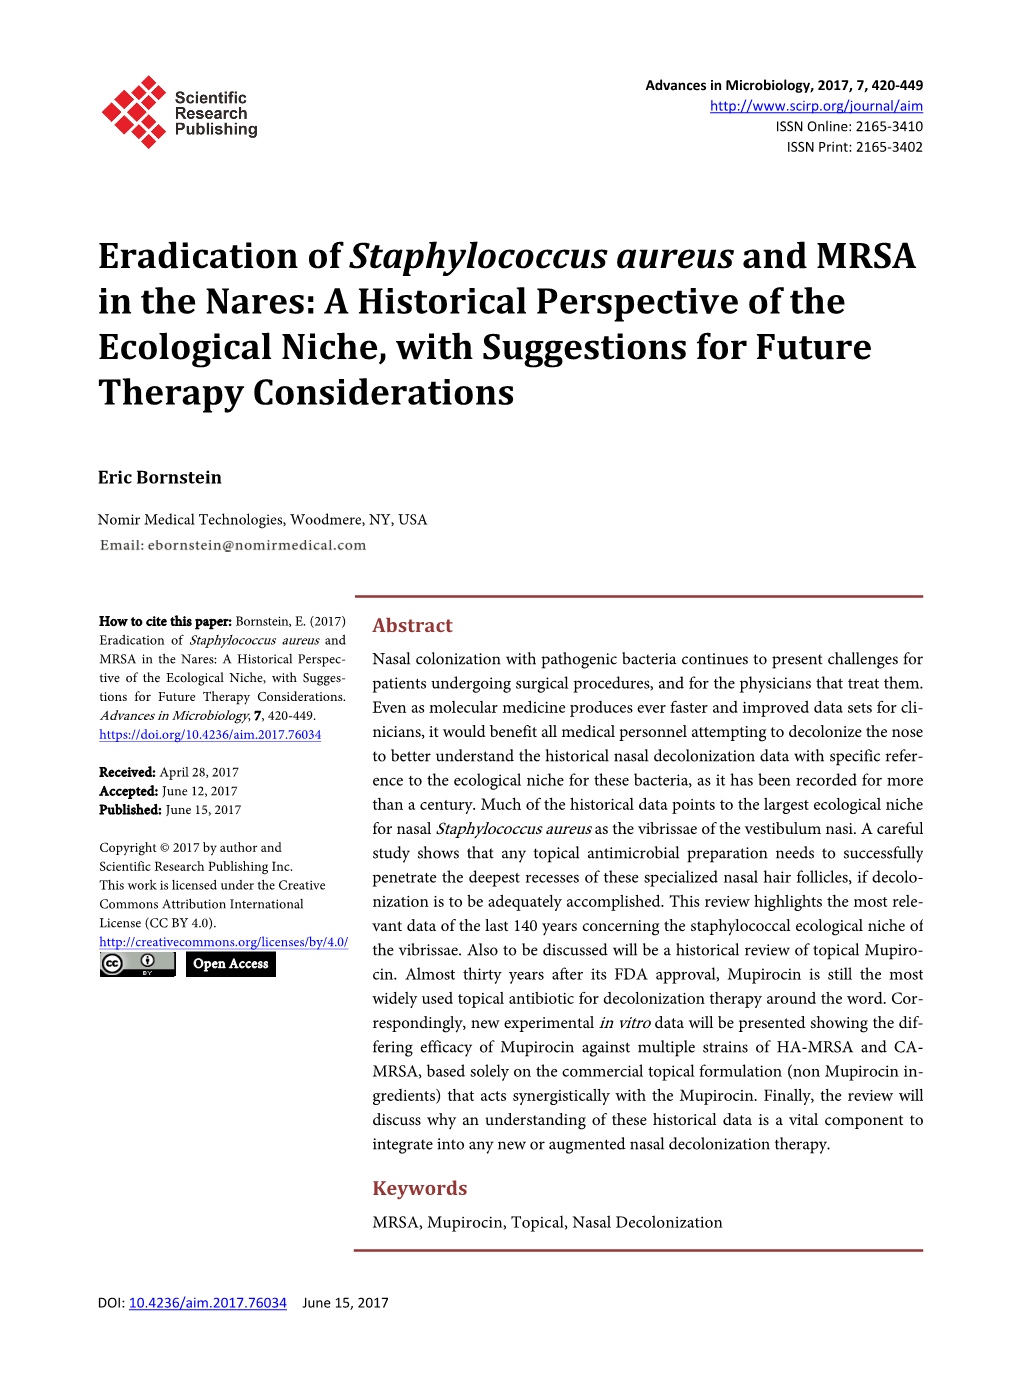 Eradication of Staphylococcus Aureus and MRSA in the Nares: a Historical Perspective of the Ecological Niche, with Suggestions for Future Therapy Considerations